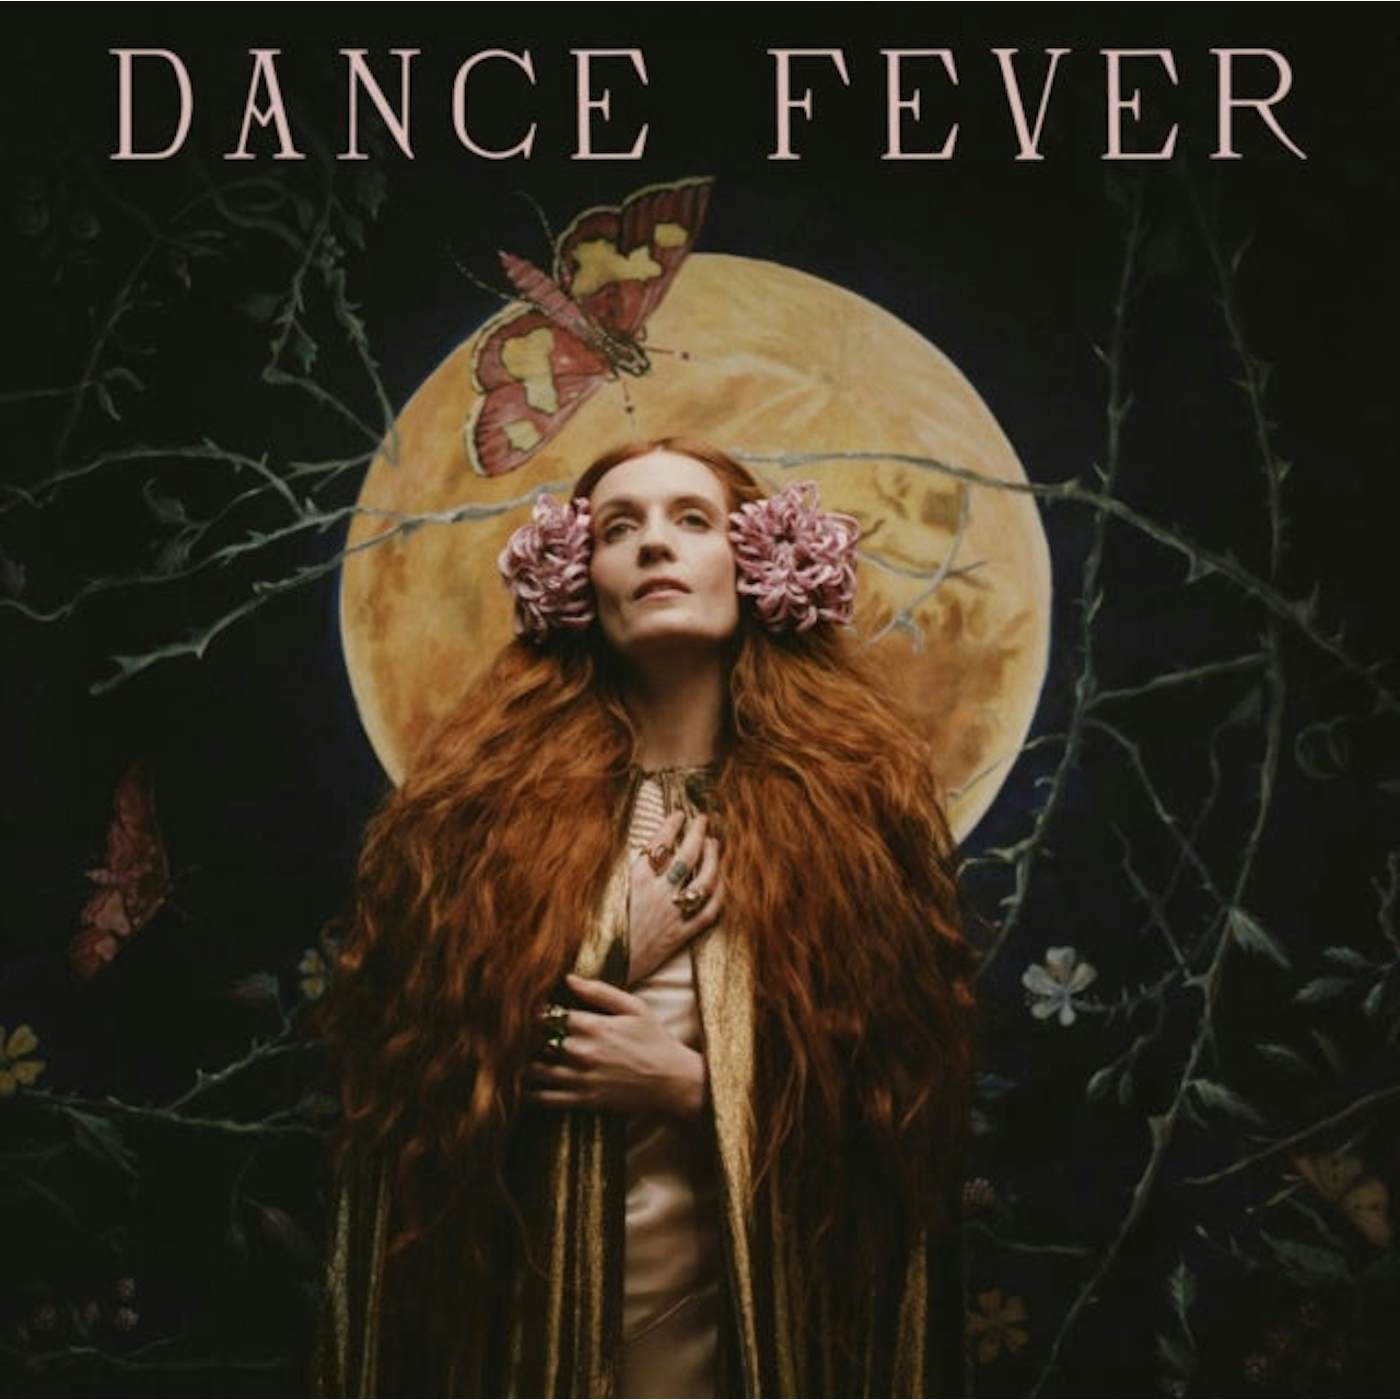 Florence + The Machine LP Vinyl Record - Dance Fever (Limited Edition)